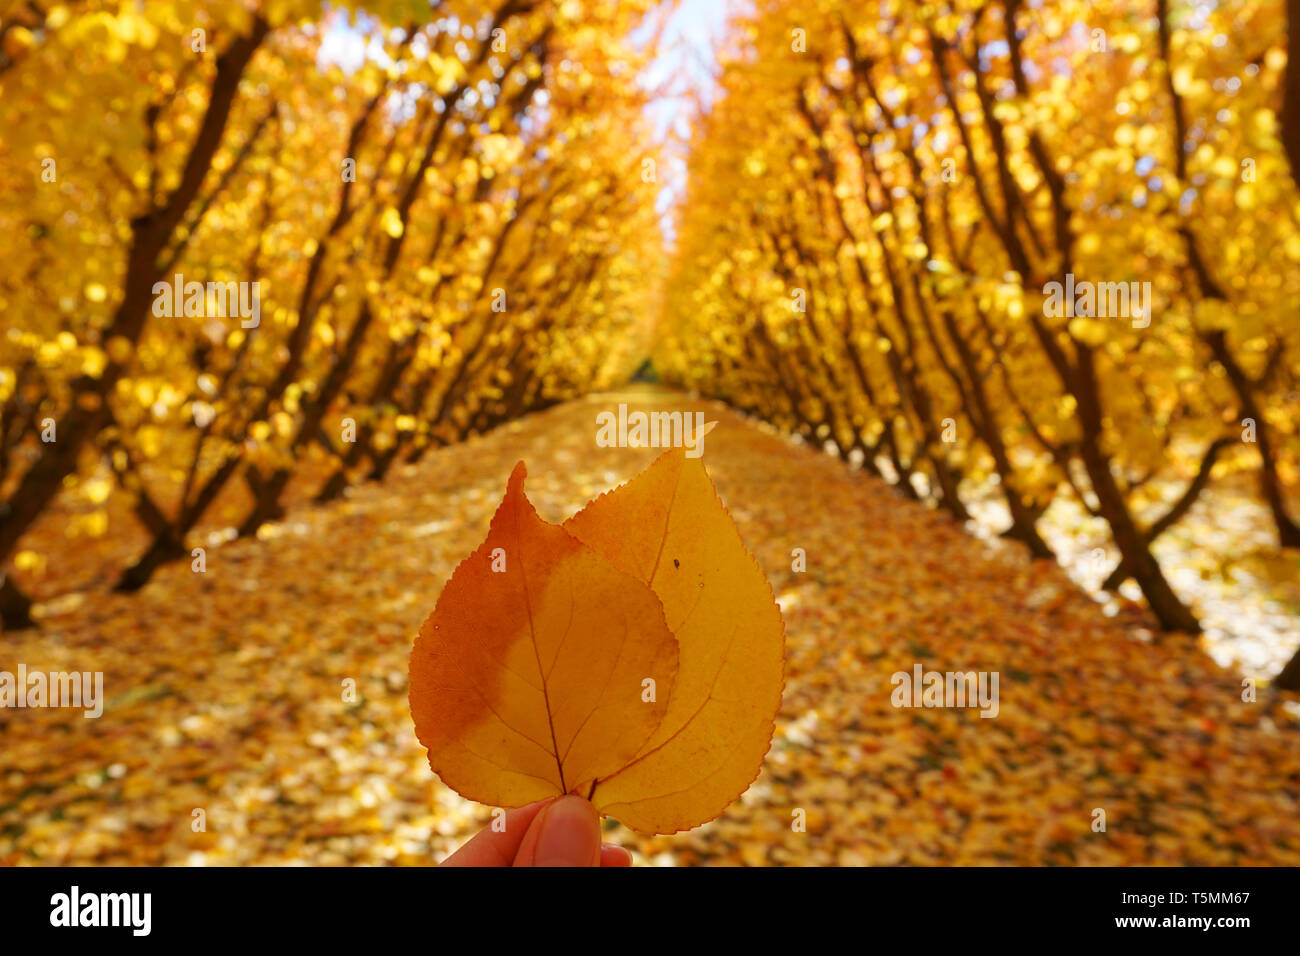 Golden yellow orange red leaf in autumn season close up hand holding with background of symmetric rows of cherry tree fallen yellow leaves in fall Stock Photo